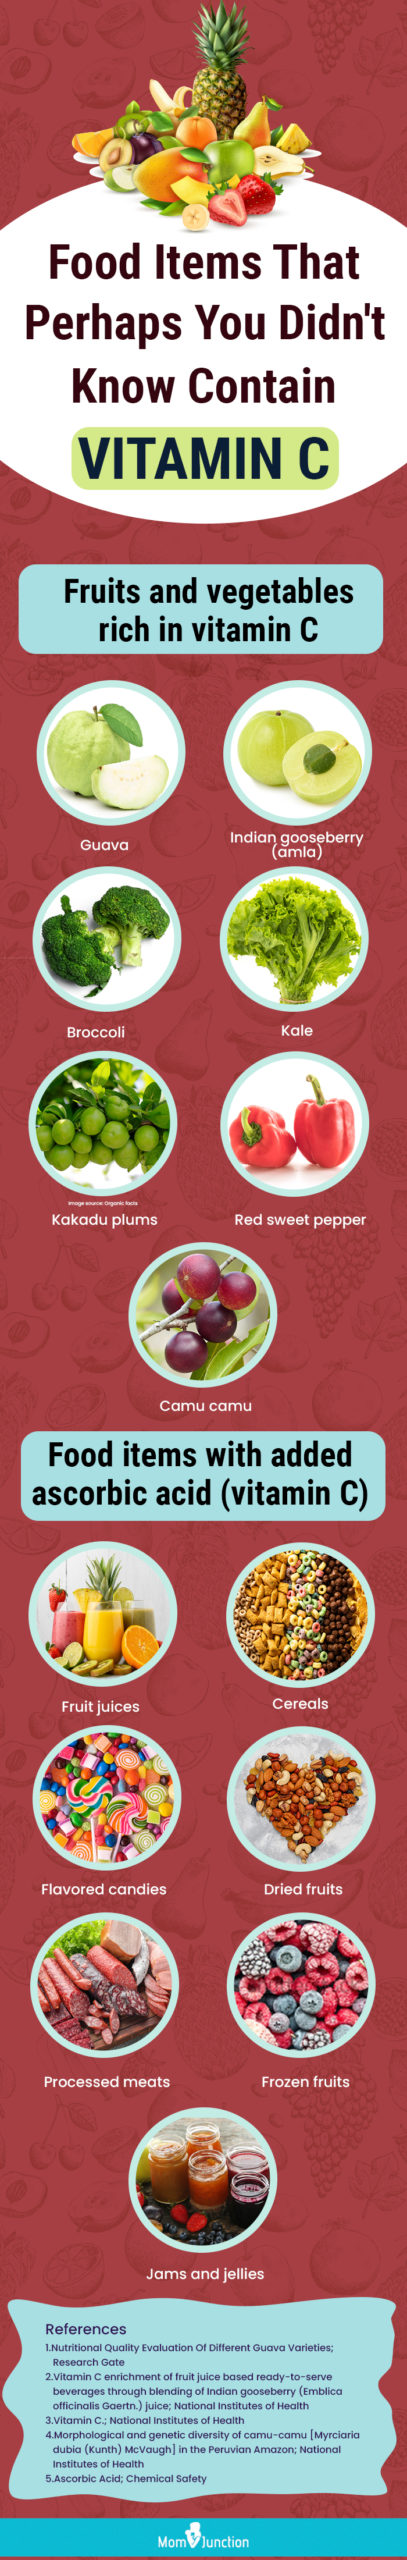 food items that perhaps you didnt know contain vitamin c (infographic)